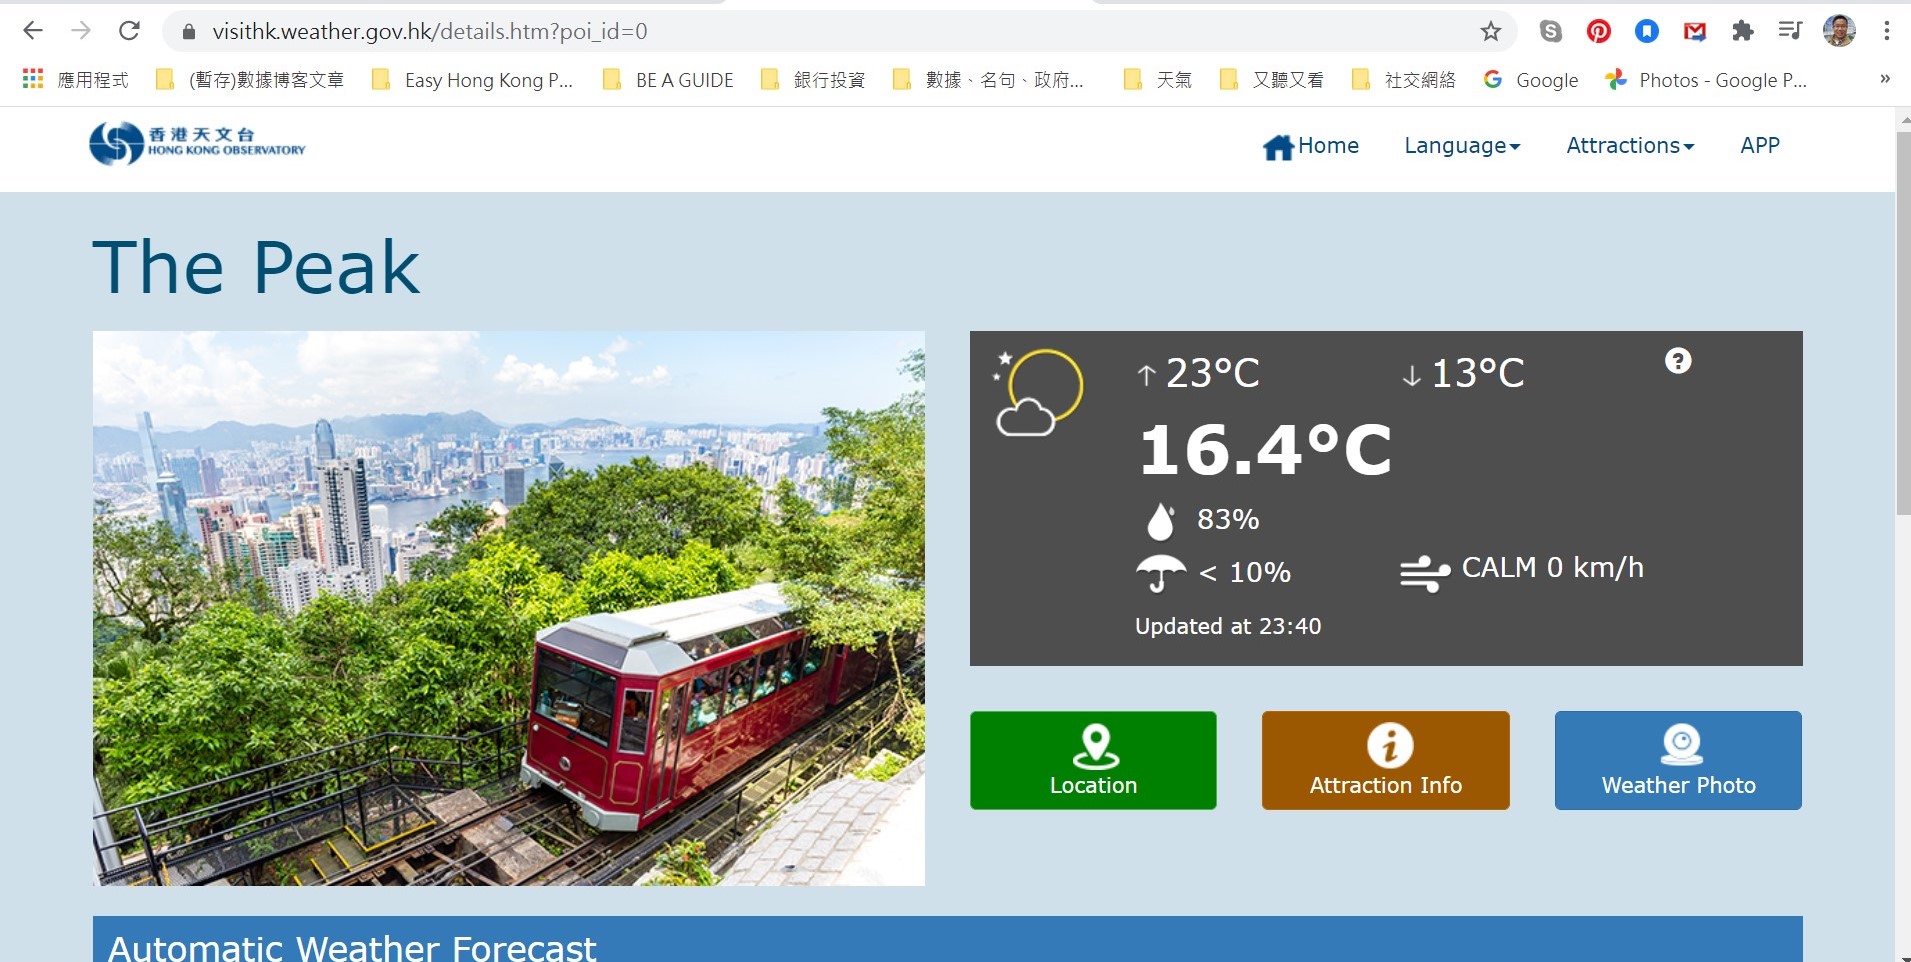 Weather info page for Victoria Peak